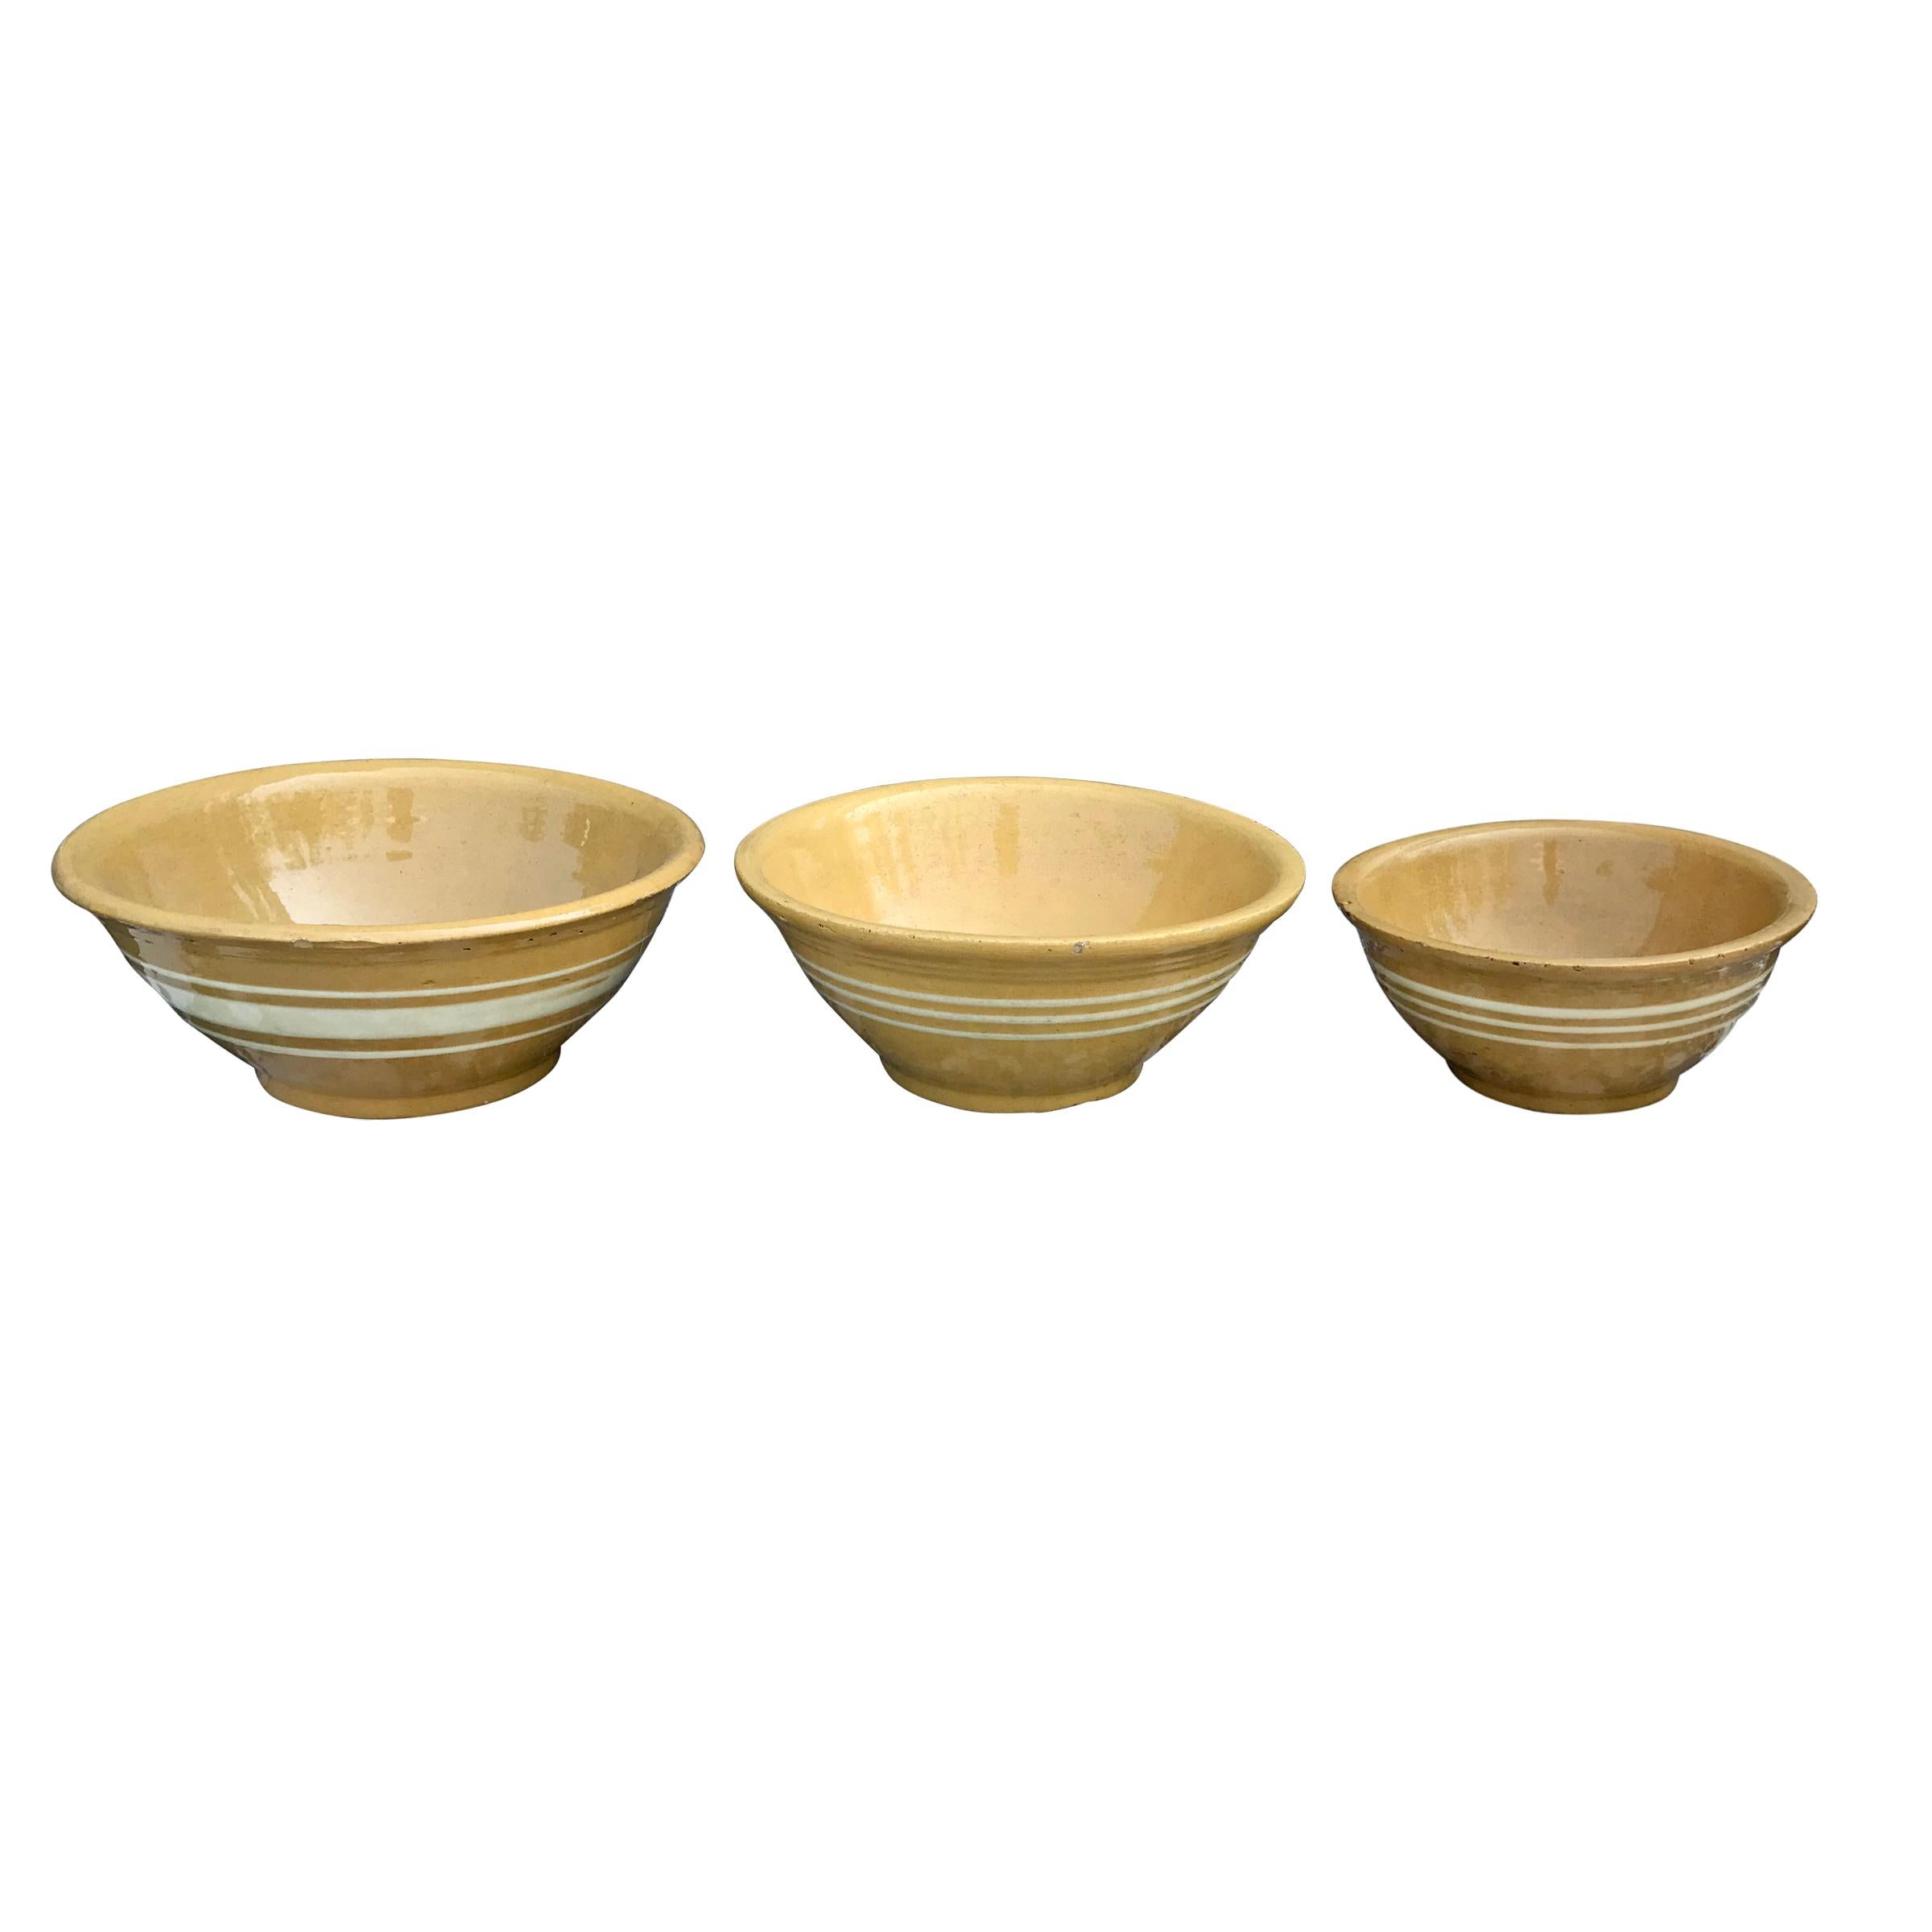 An assembled set of three late 19th century American yellow ware mixing bowls, two with three similarly sized embossed white glazed stripes and the largest with a wide embossed white glazed stripe flanked by two thinner embossed white glazed